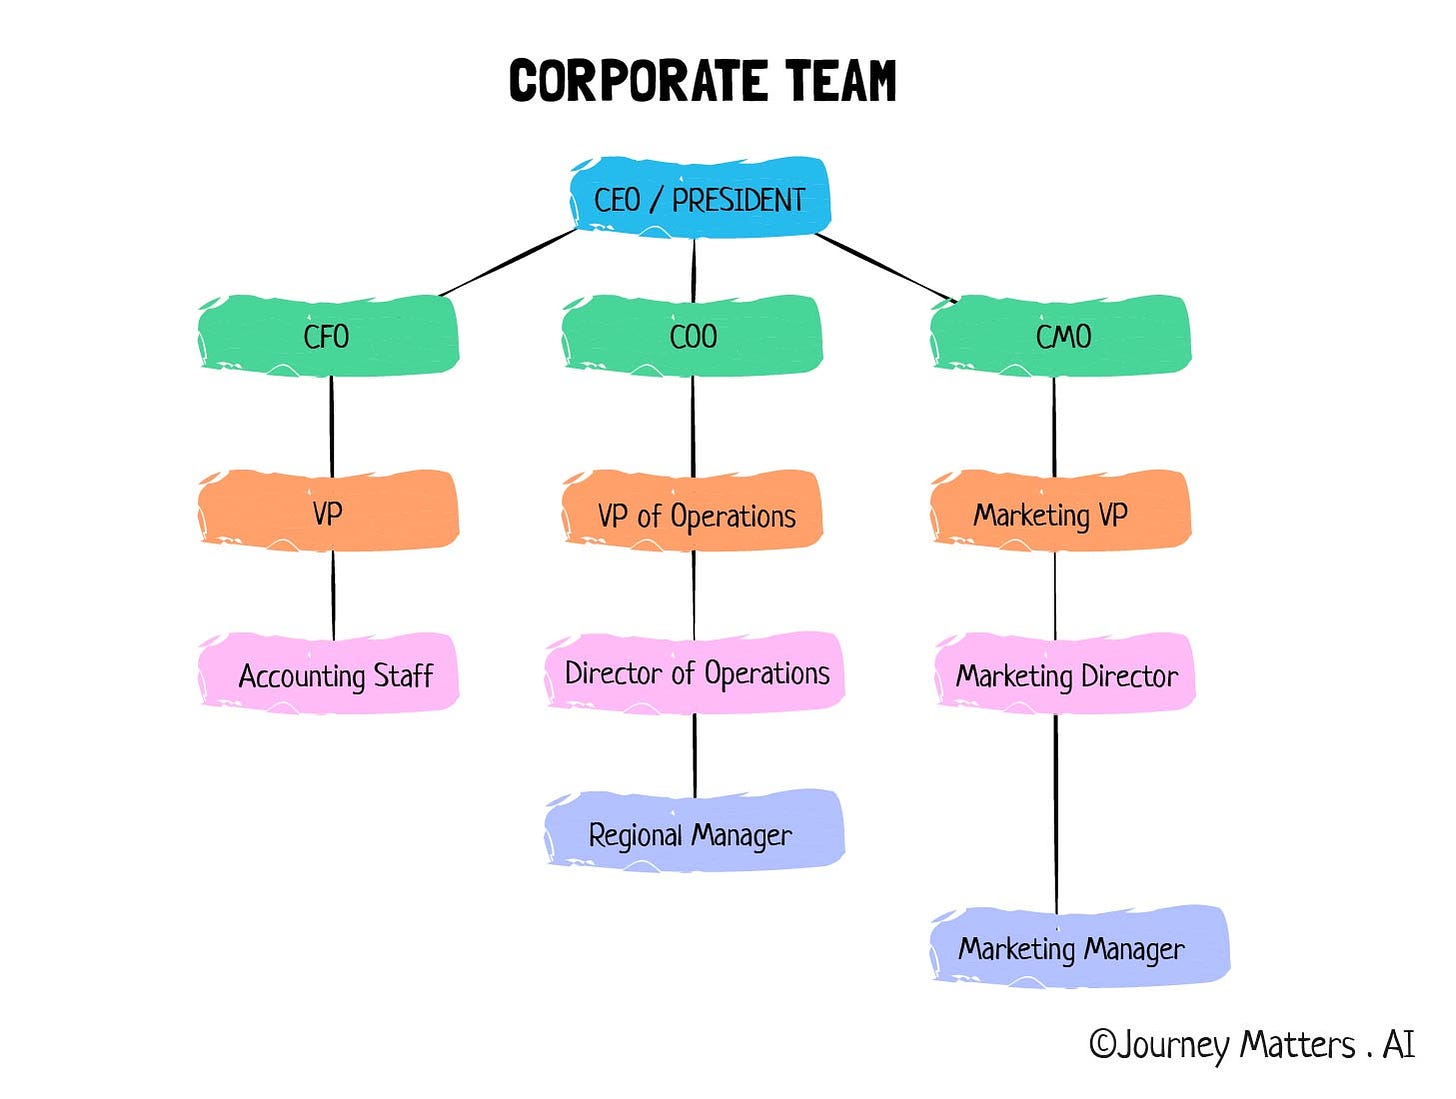 A hierarchical graph showing different roles in the corporate team. The top position is that of CEO, under whom are the CFO, COO, and CMO. The VP, VP of Operations, and Marketing VP come under them. The Accounting staff, Director of Operations, and Marketing Director are third in the order. The regional manager works under the Director of operations, and the Marketing manager works under the Marketing director. 